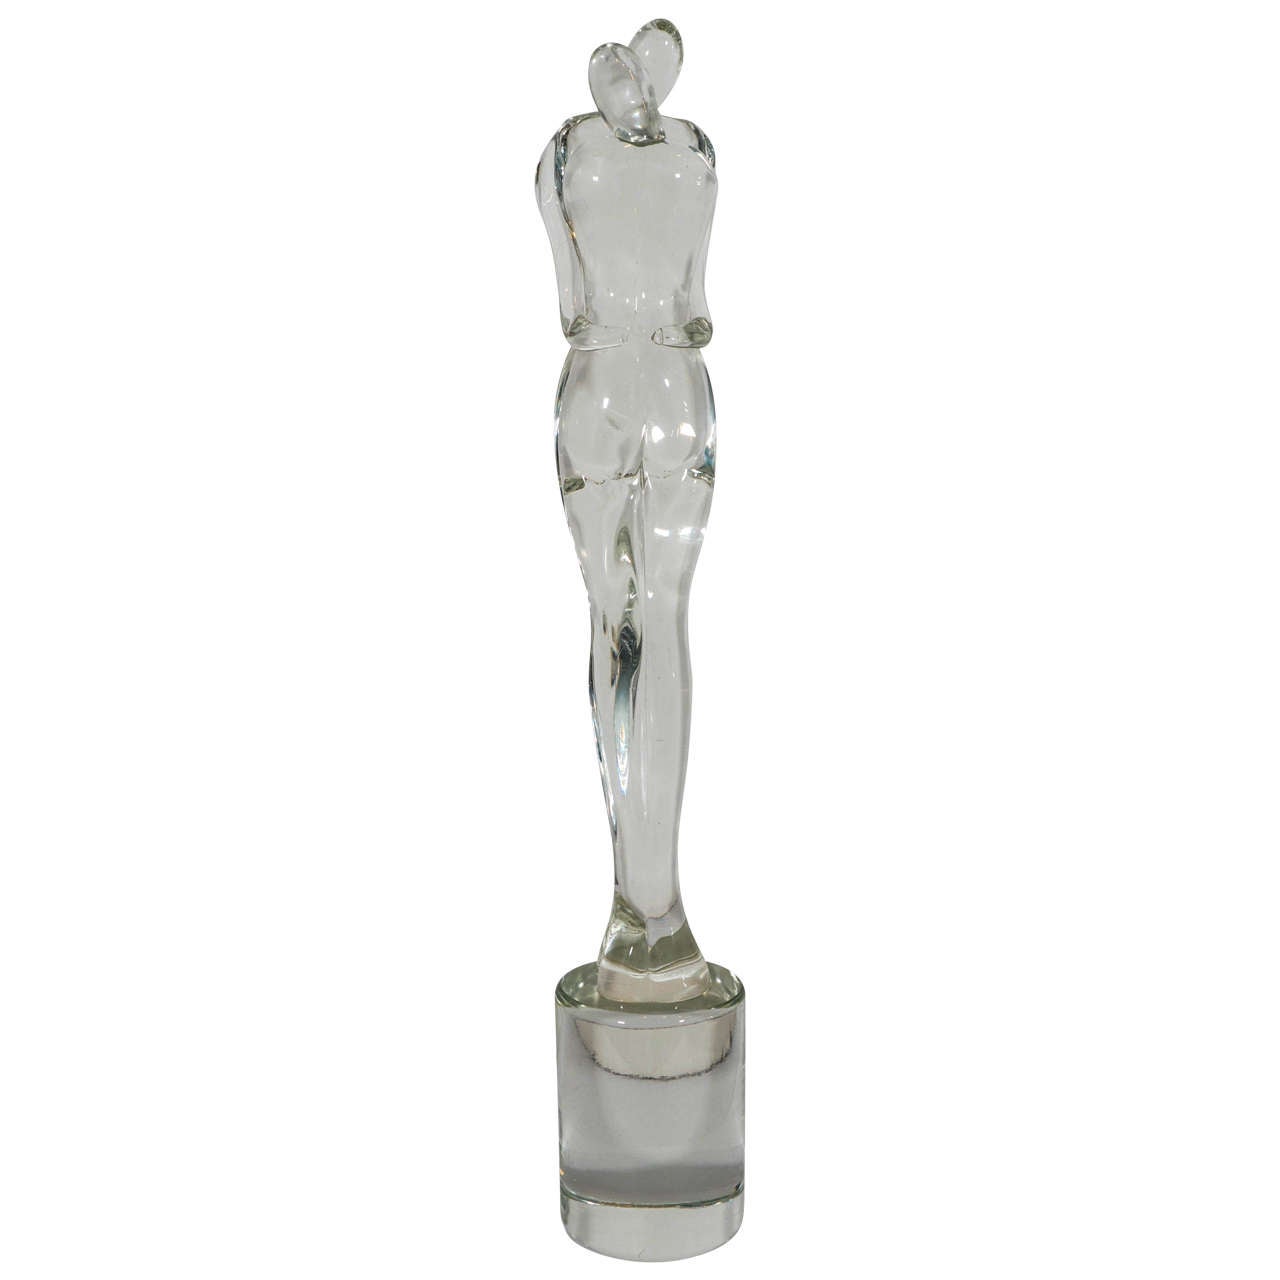 A Midcentury Murano Glass Sculpture of a Couple Embracing Inspired by Seguso